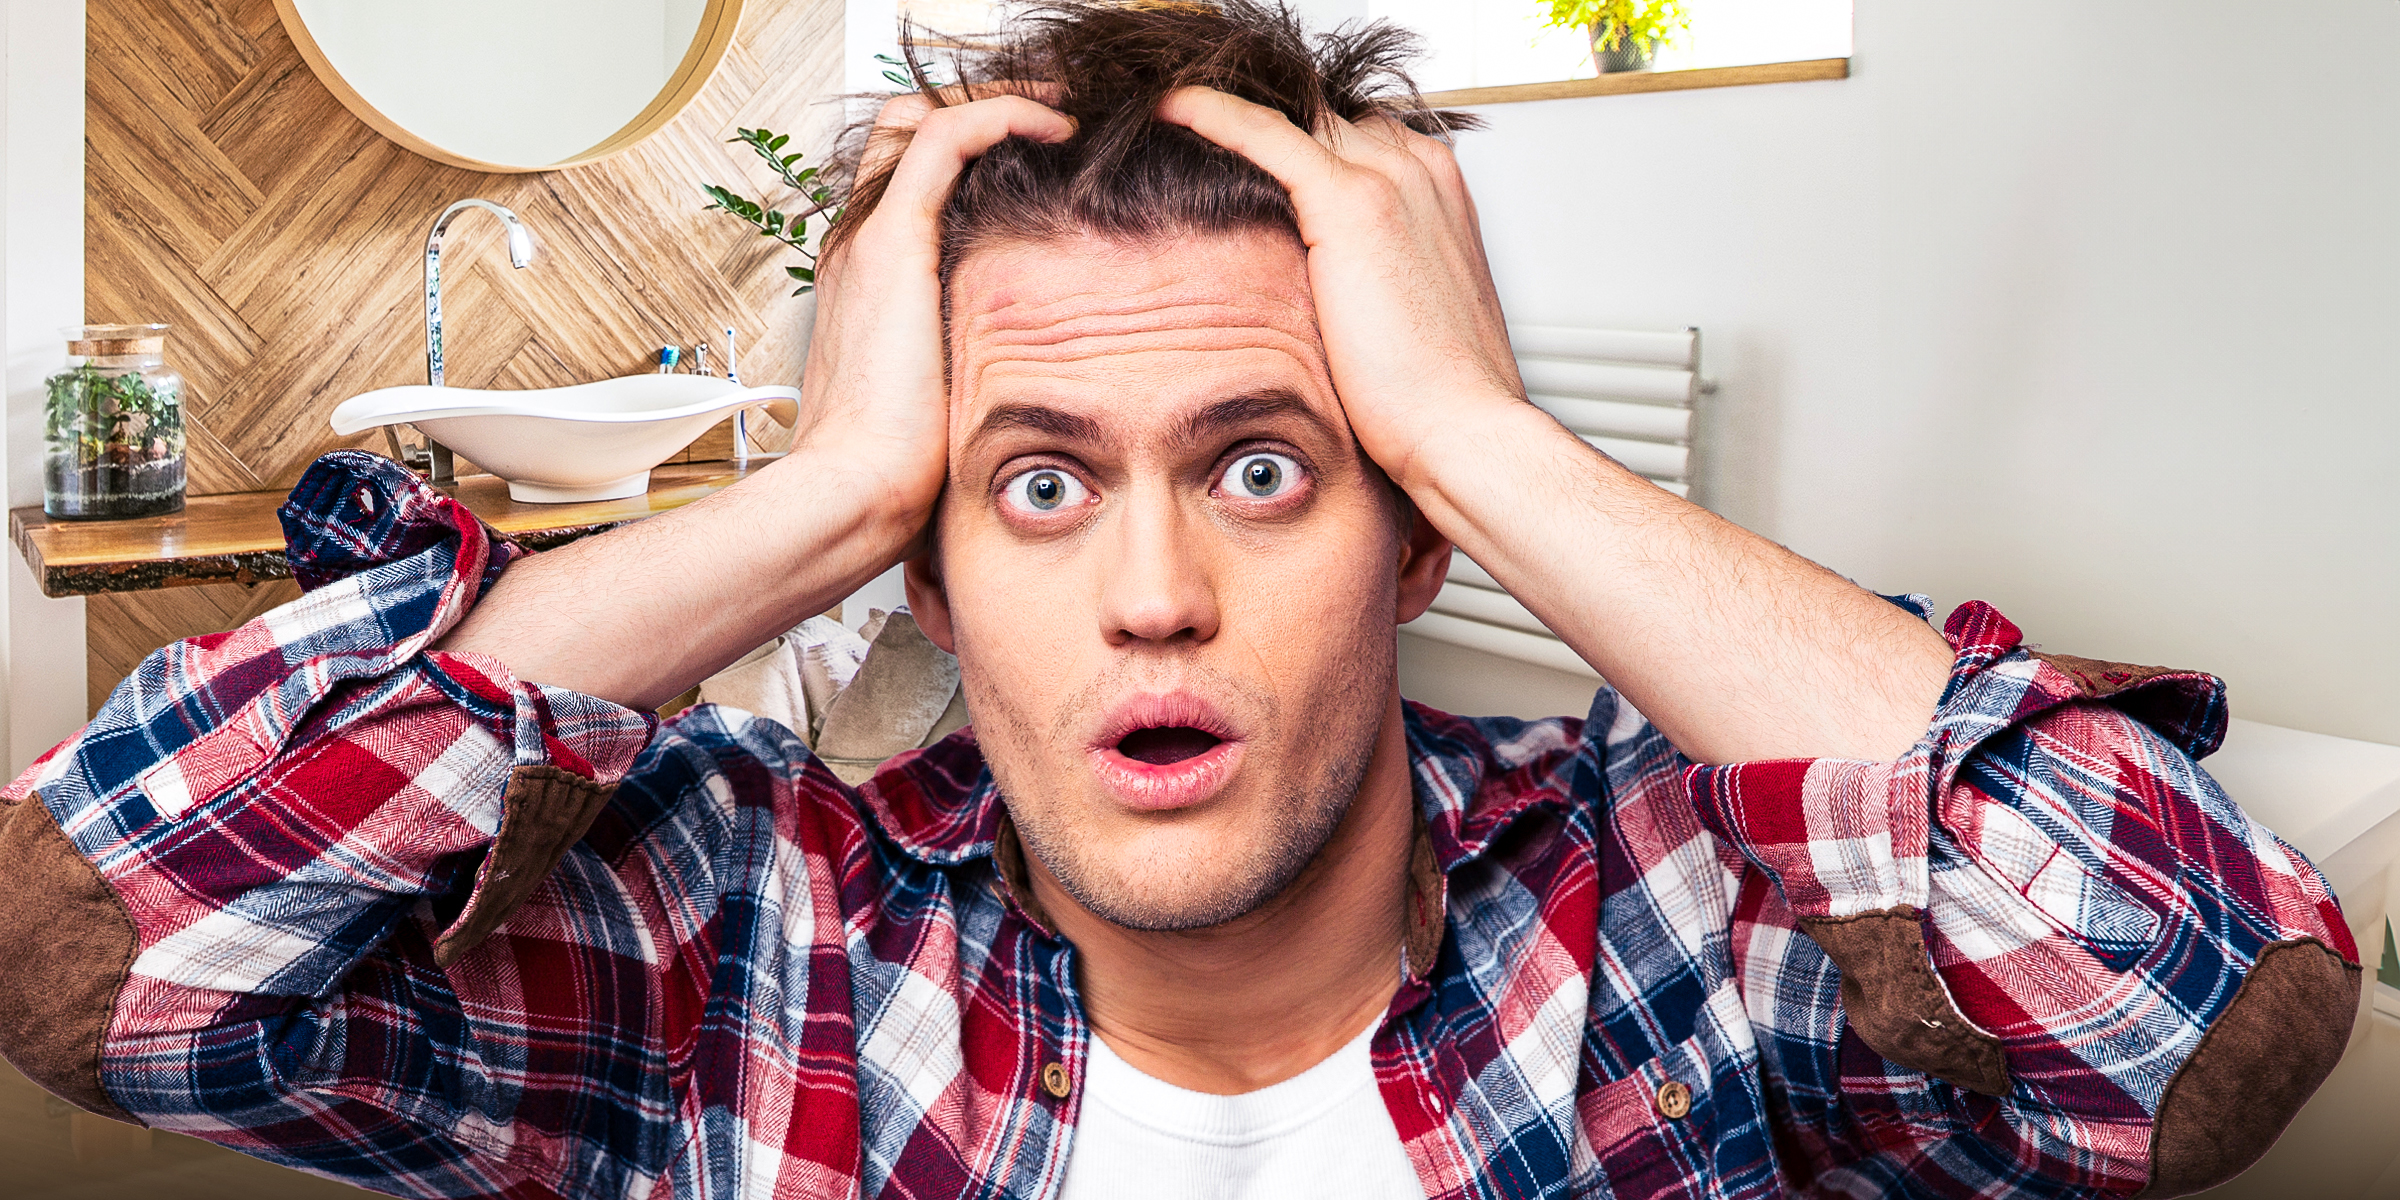 A man holding his head in shock | Source: Shutterstock